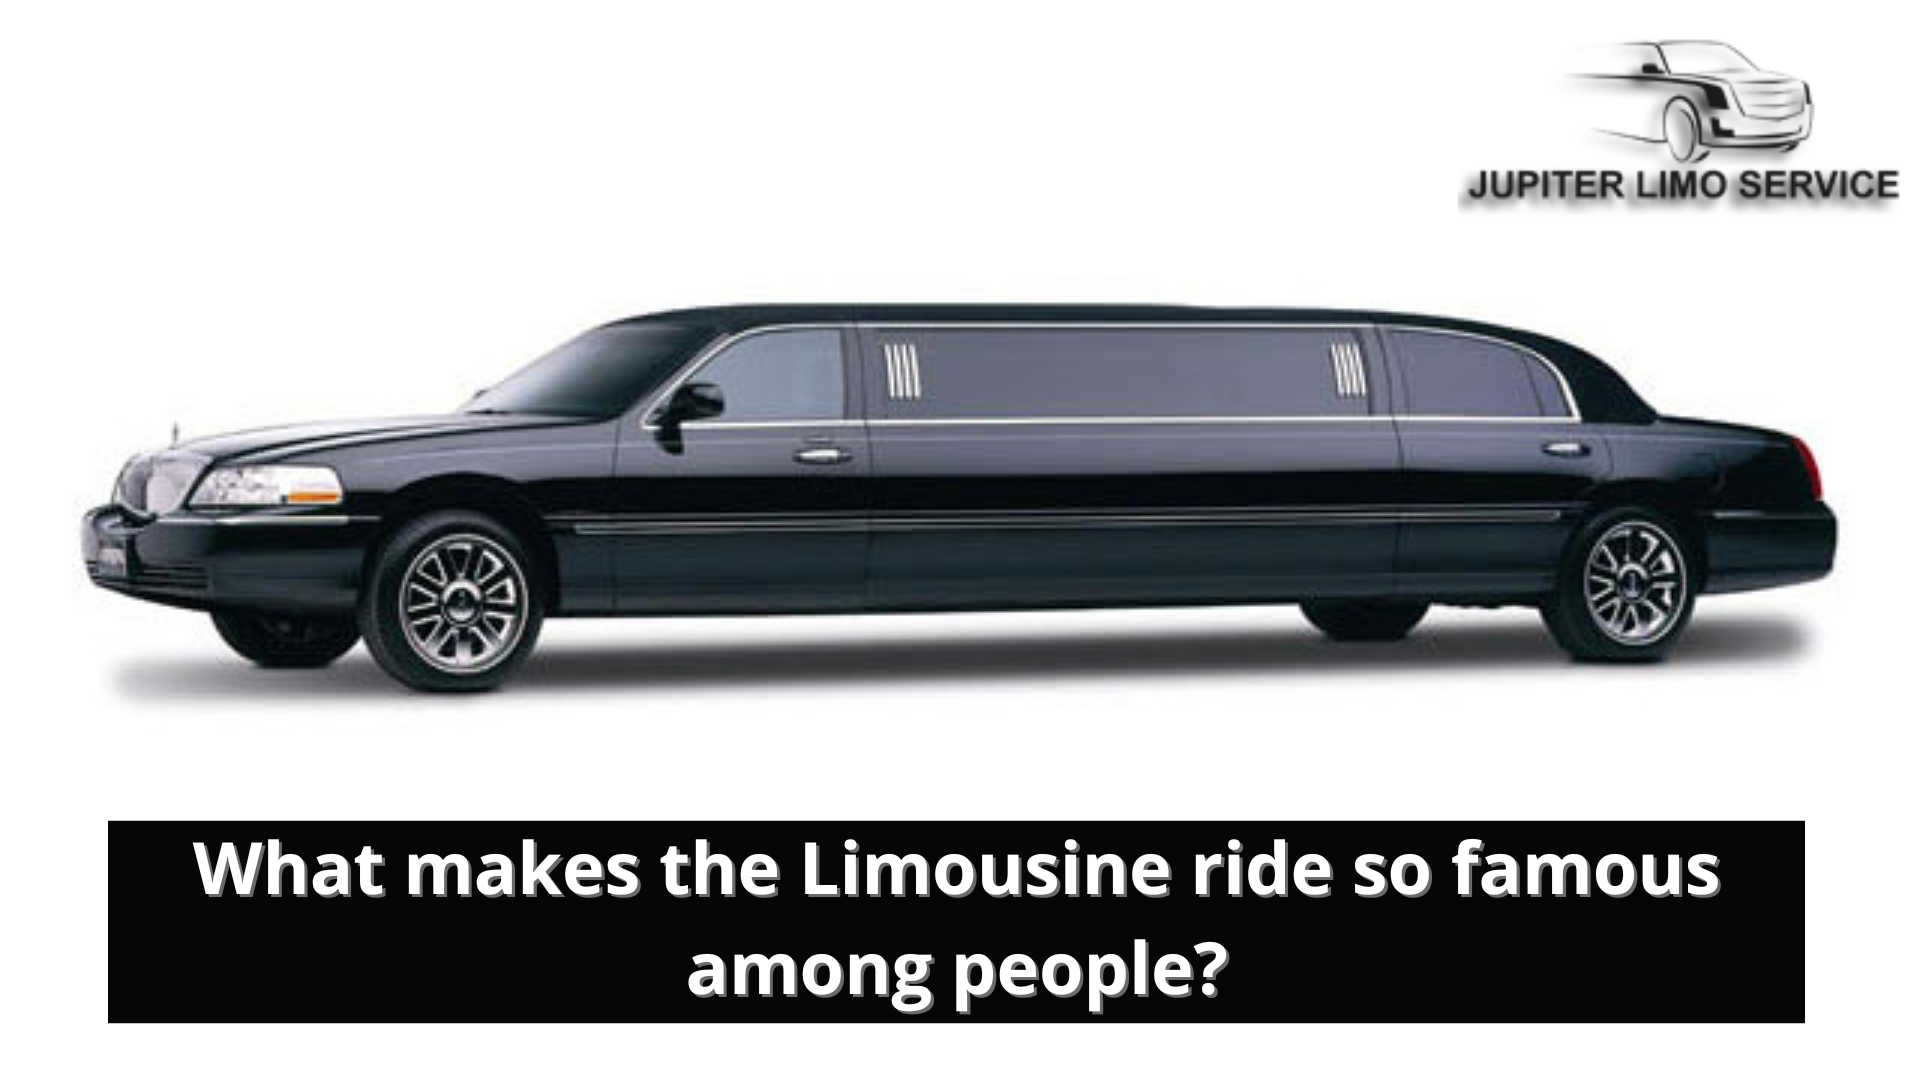 What makes the Limousine ride so famous among people?